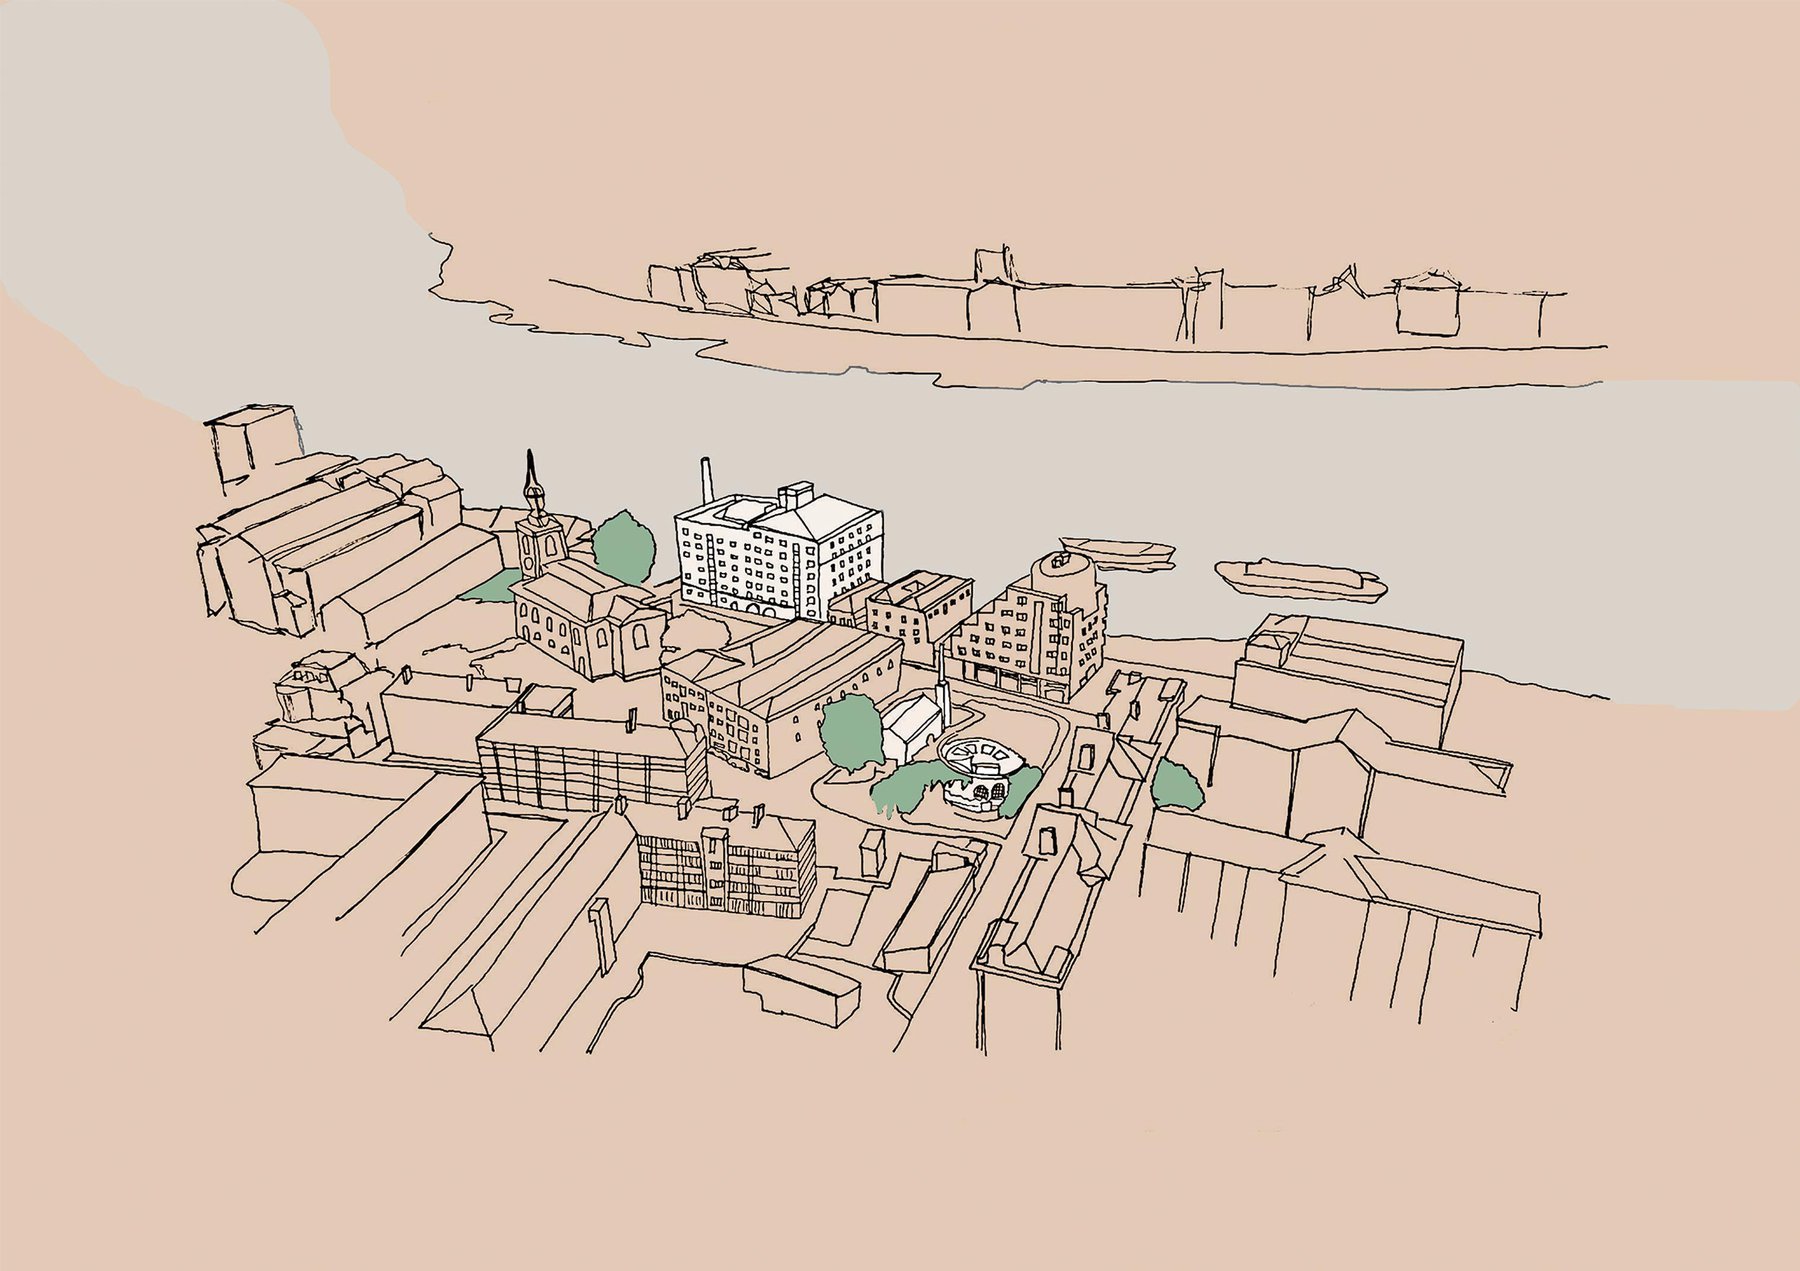 Birds eye view of Rotherhithe with pink background, drawn by hand.